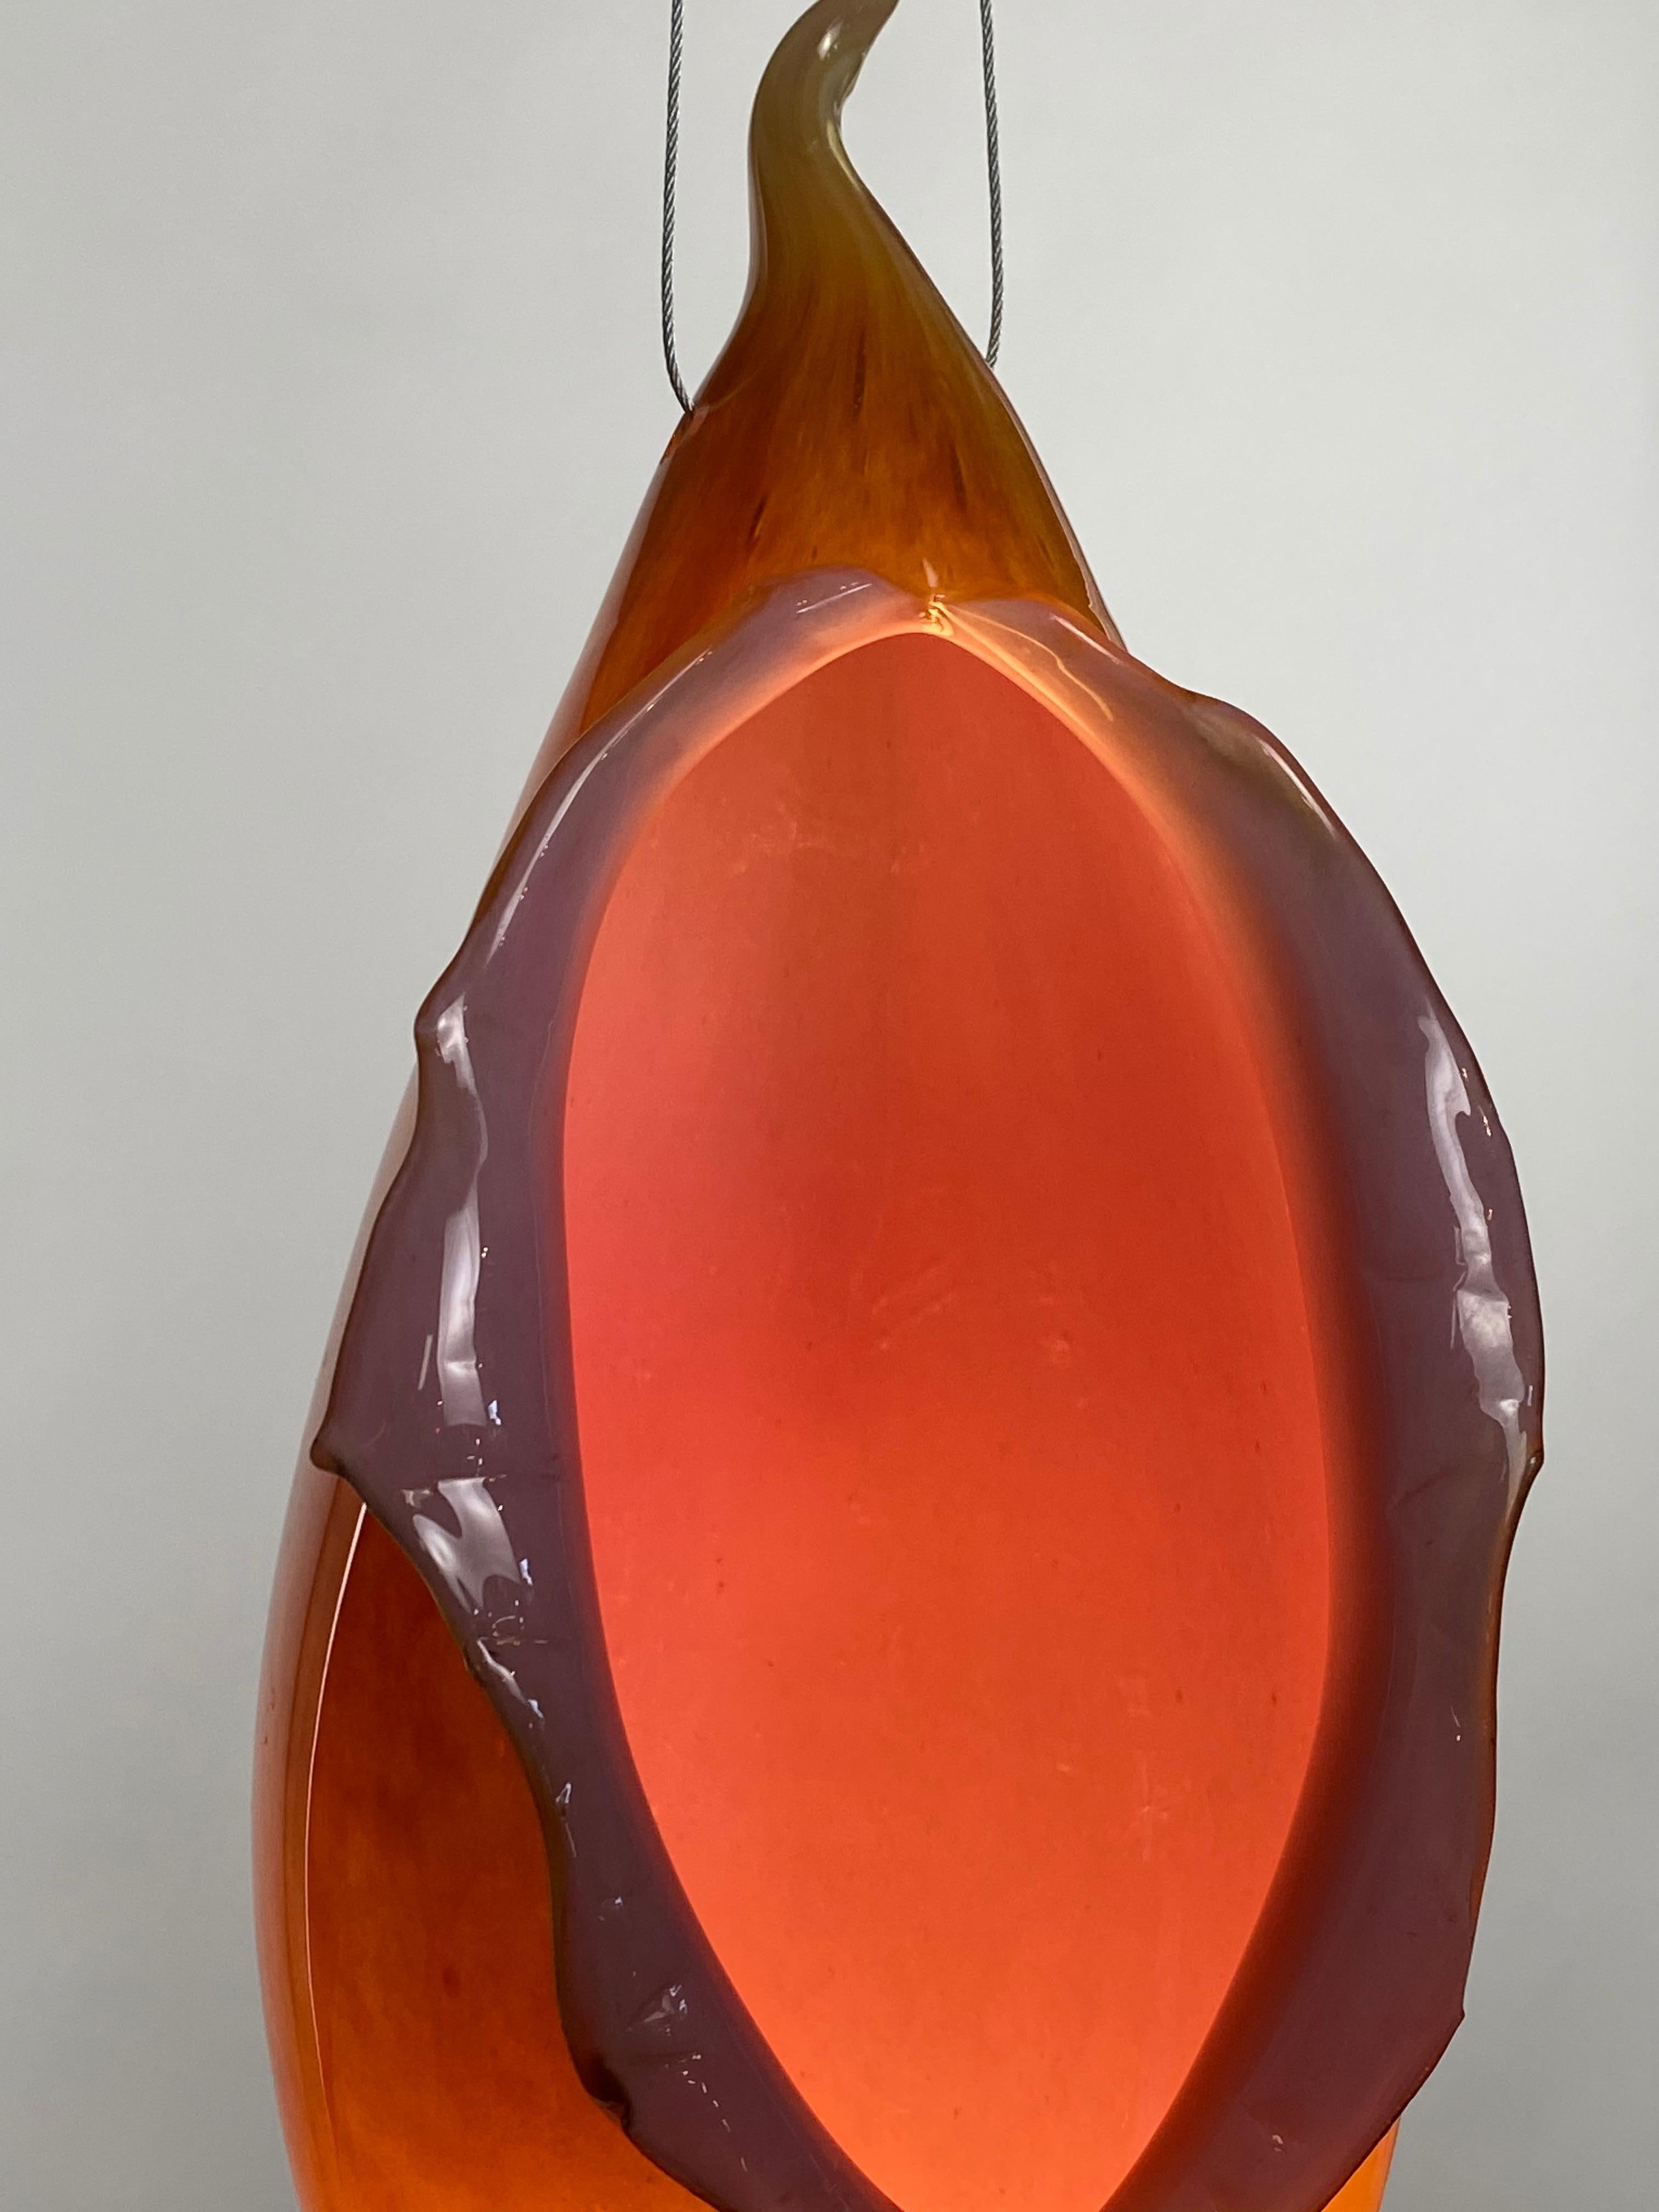 American Blown Glass Pink and Orange Lamp Pendent Light, 21st Century by Mattia Biagi For Sale